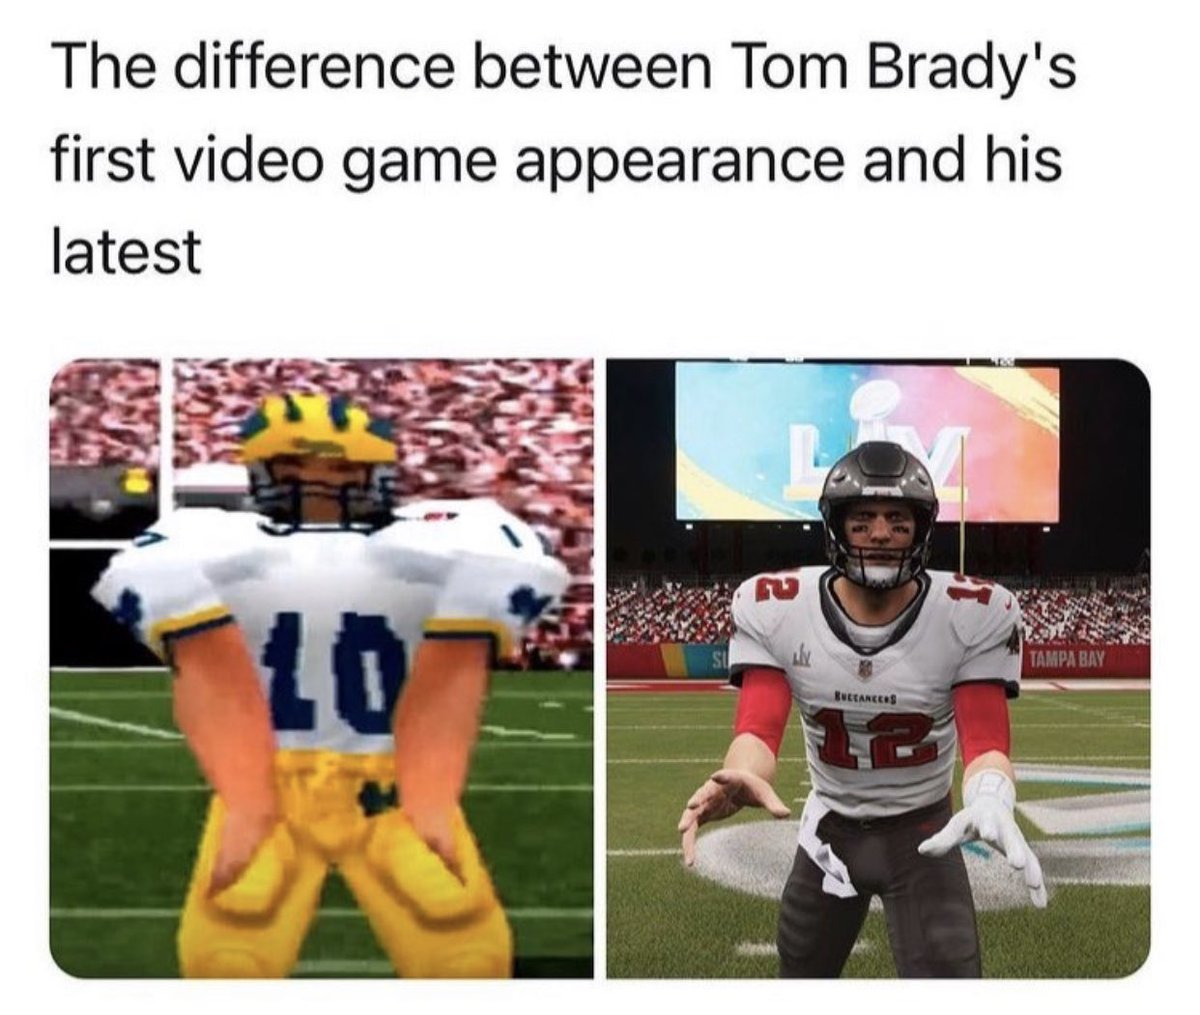 tom brady first video game appearance - The difference between Tom Brady's first video game appearance and his latest Tampa Bay 10 Bultancers